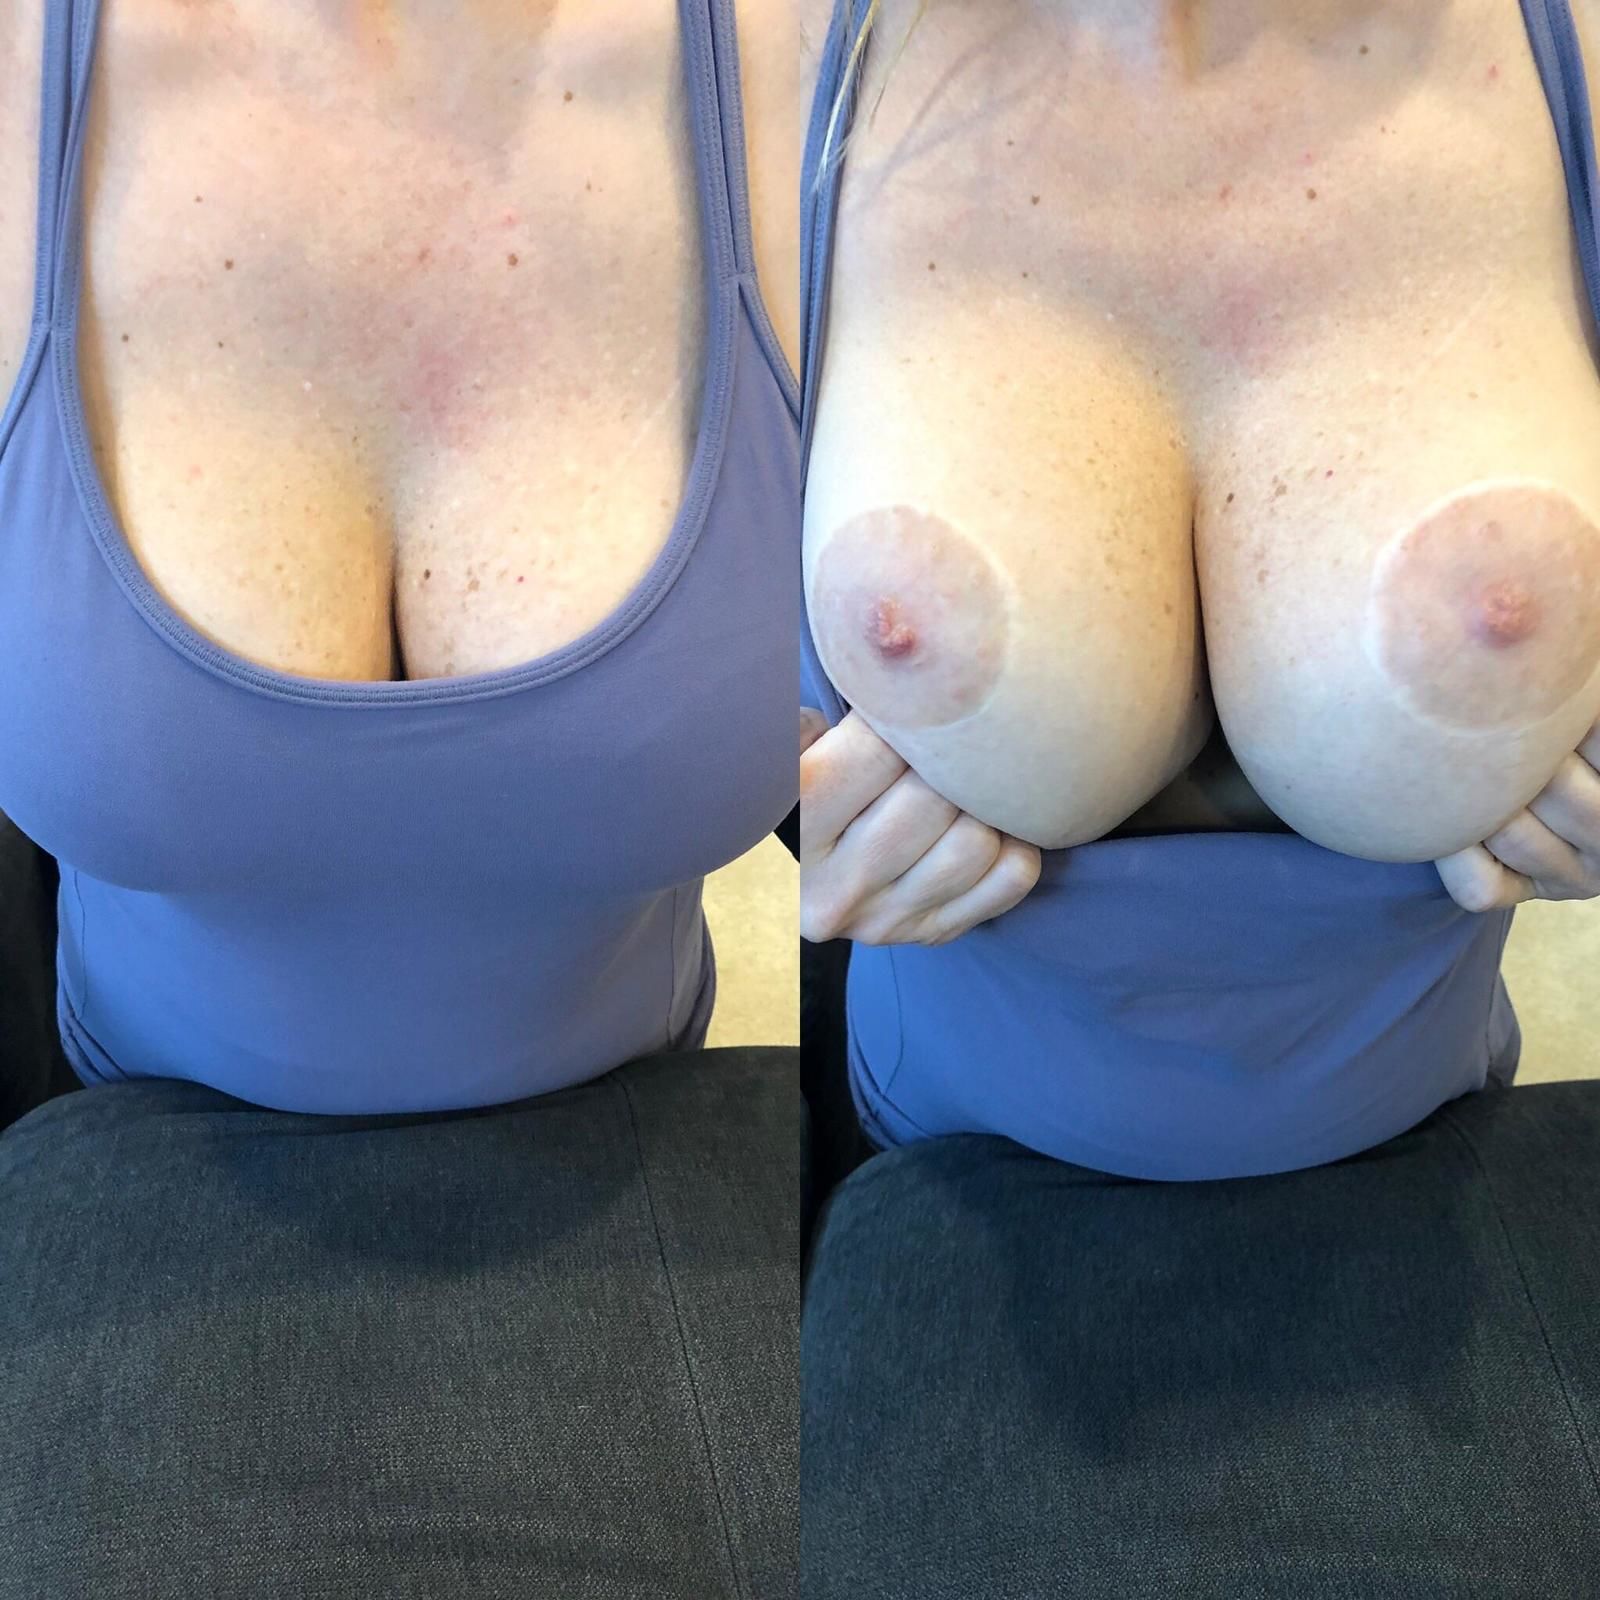 Showing My Wife's Large Breast